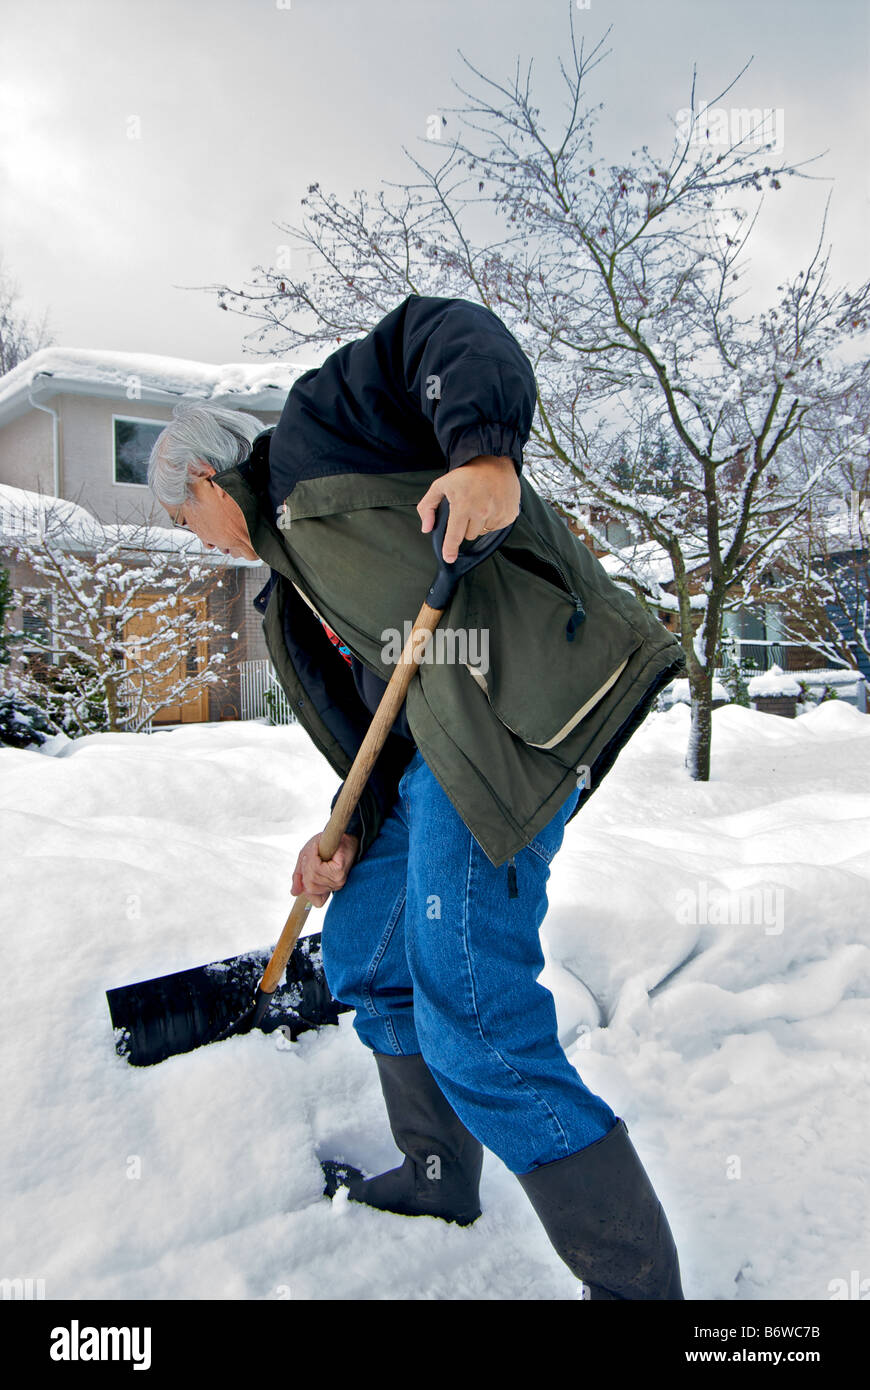 Man using proper bent knee stance for shoveling snow after a big snowstorm Stock Photo